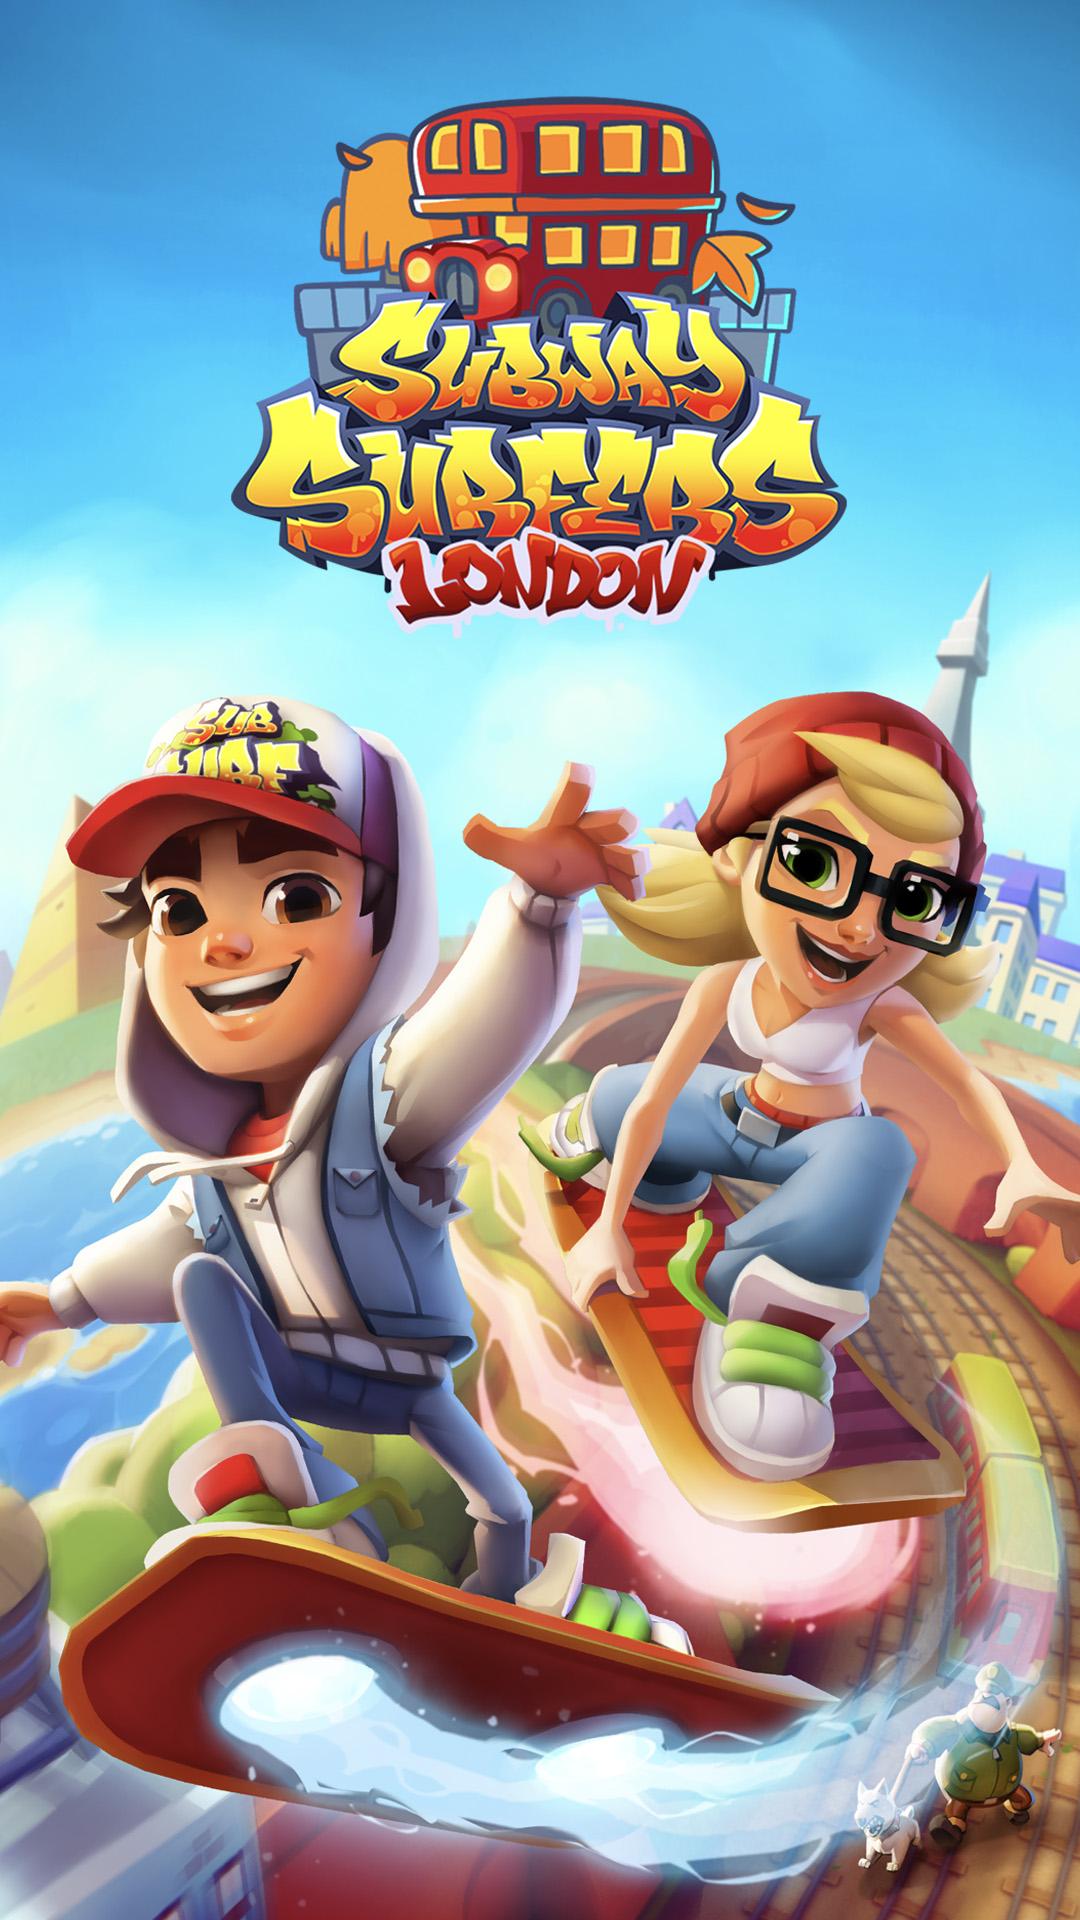 Download Subway Surfers For PC, Subway Surfers On PC